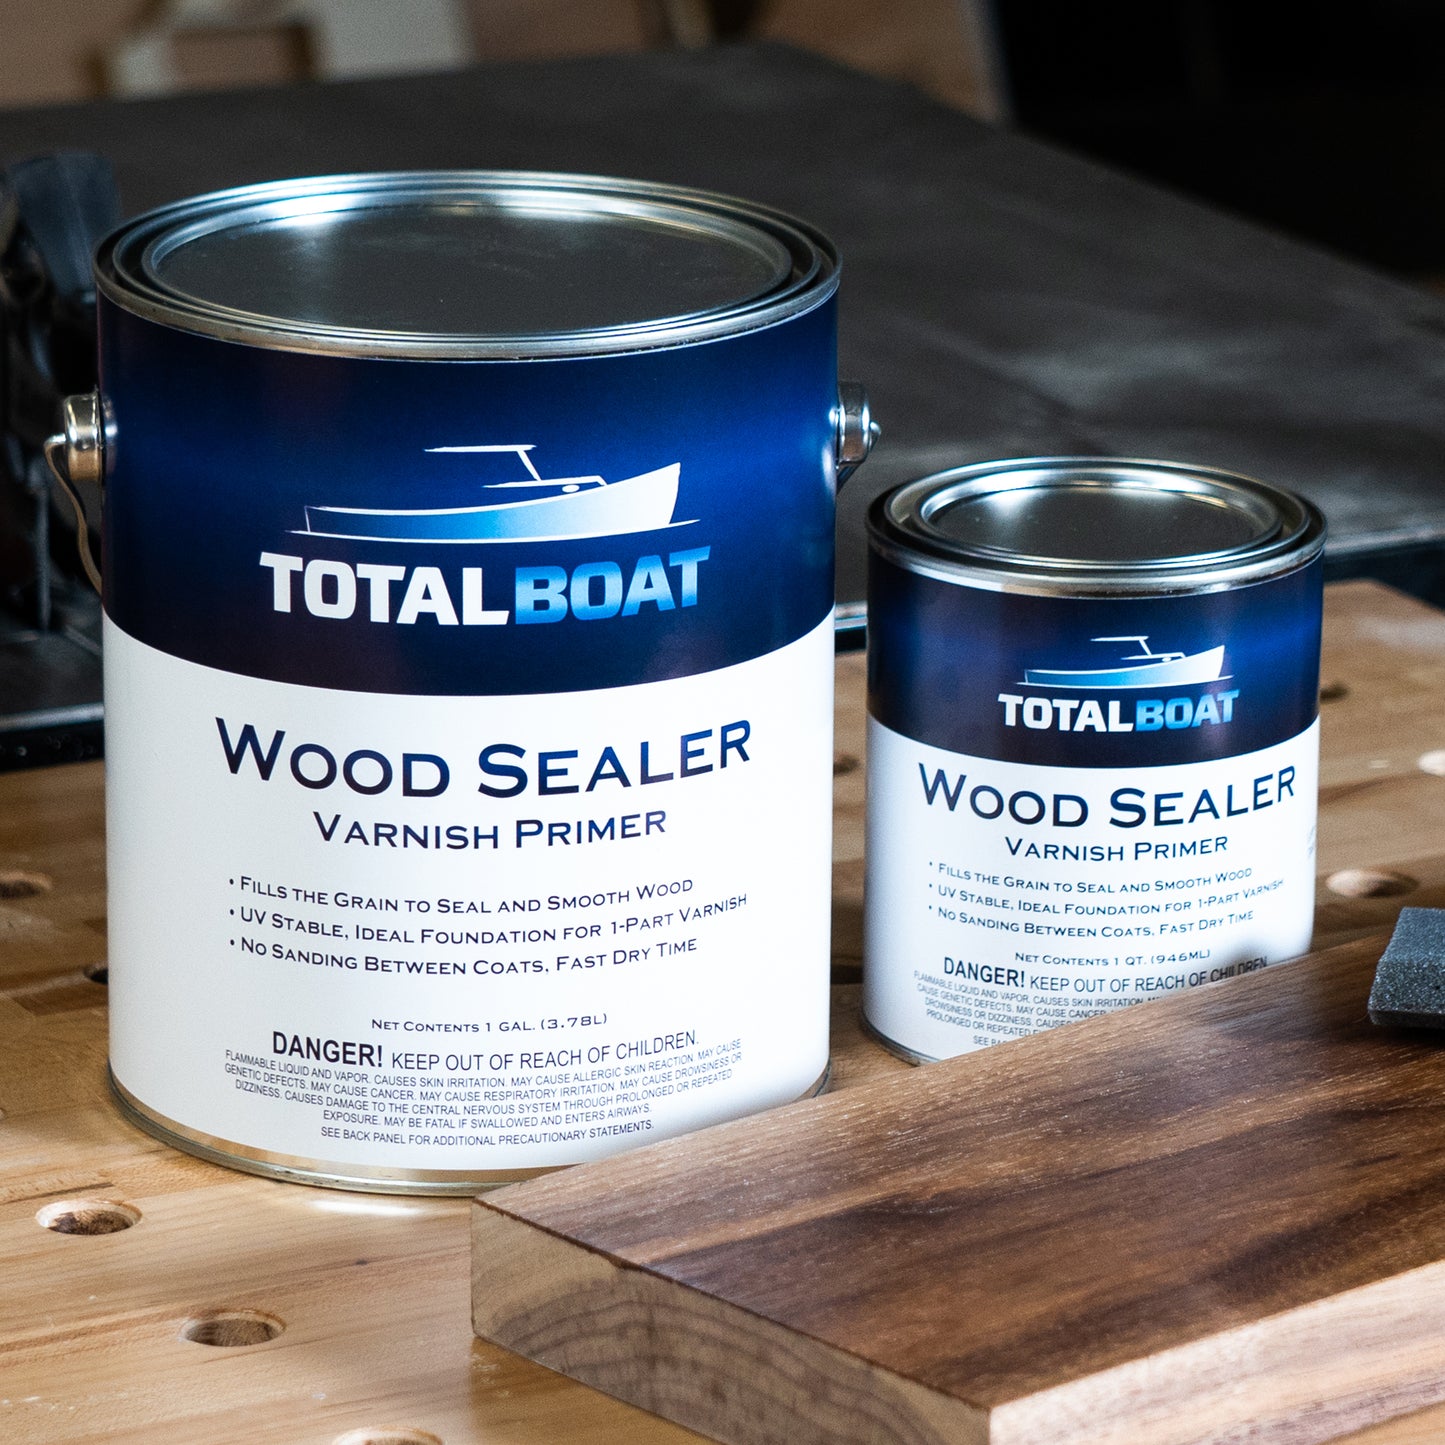 TotalBoat Wood Sealer Varnish Primer available in gallons and quarts